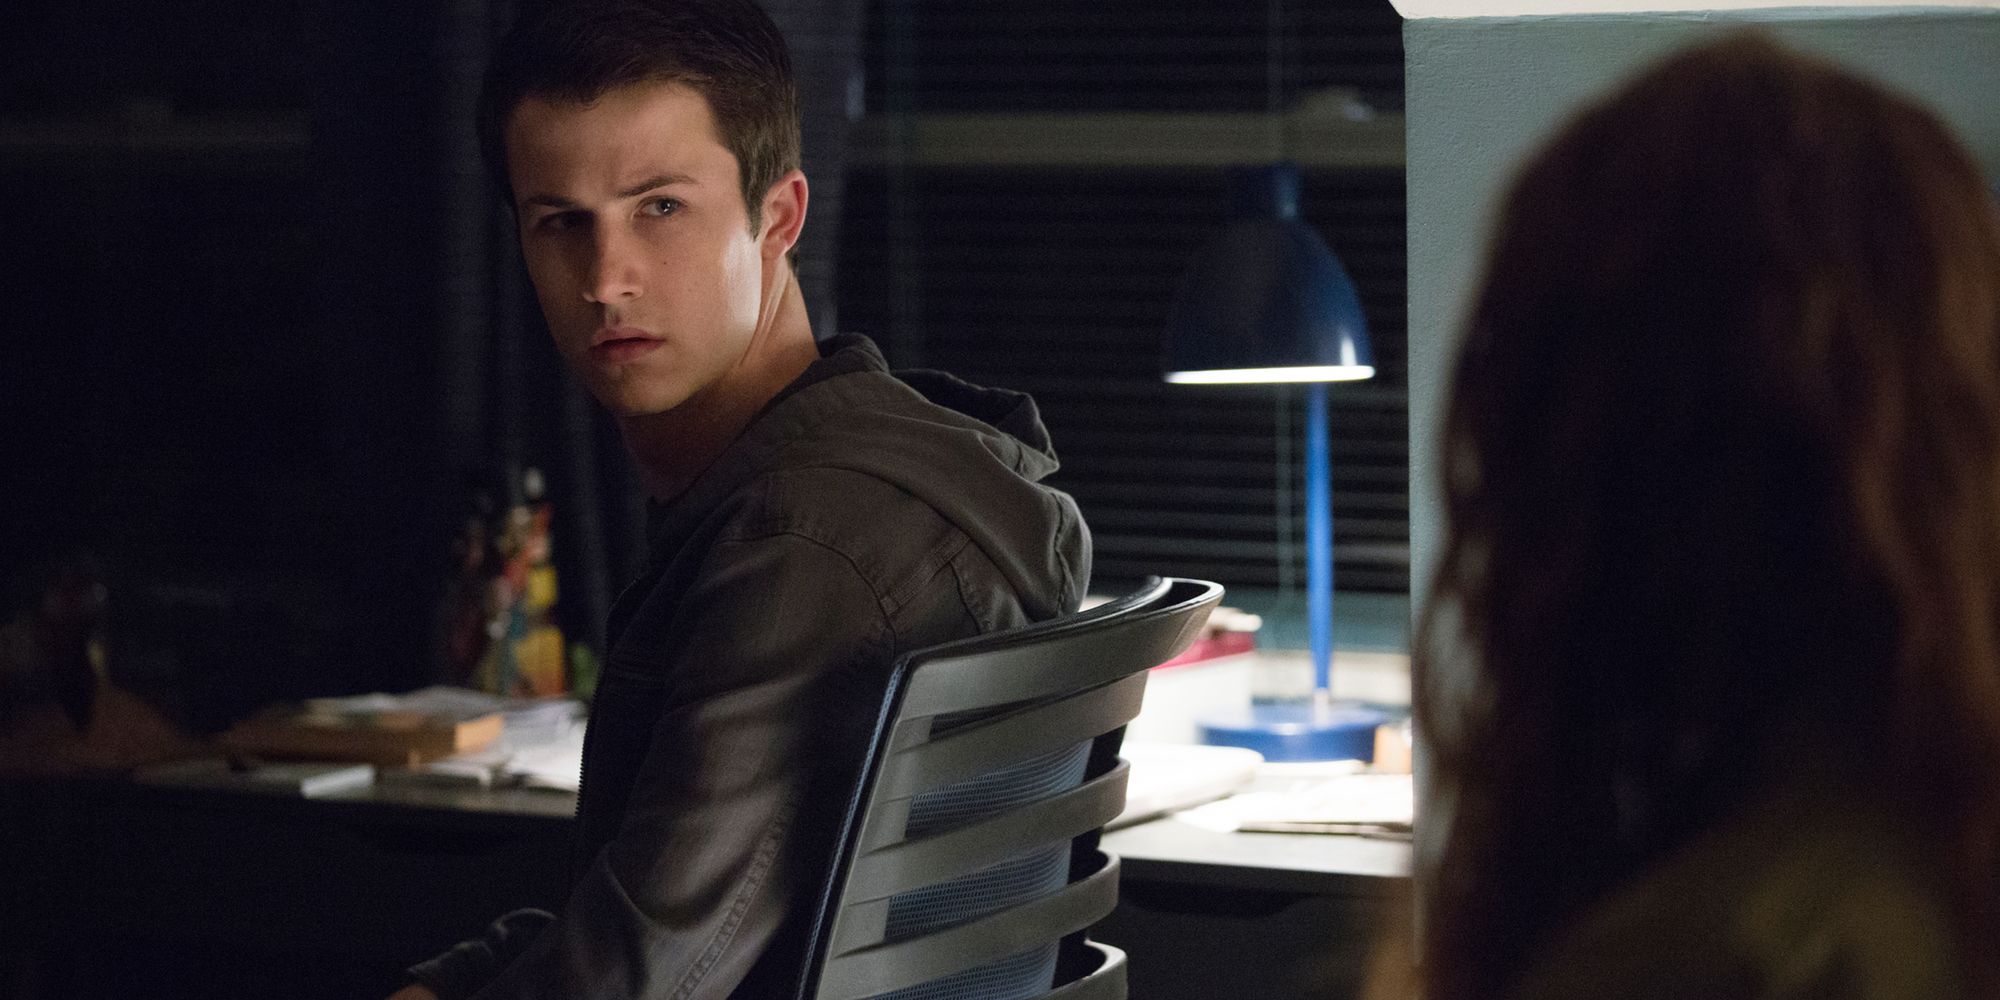 13 Reasons Why Season 2 Review: An Unnecessary Follow-Up To A Self-Contained Story